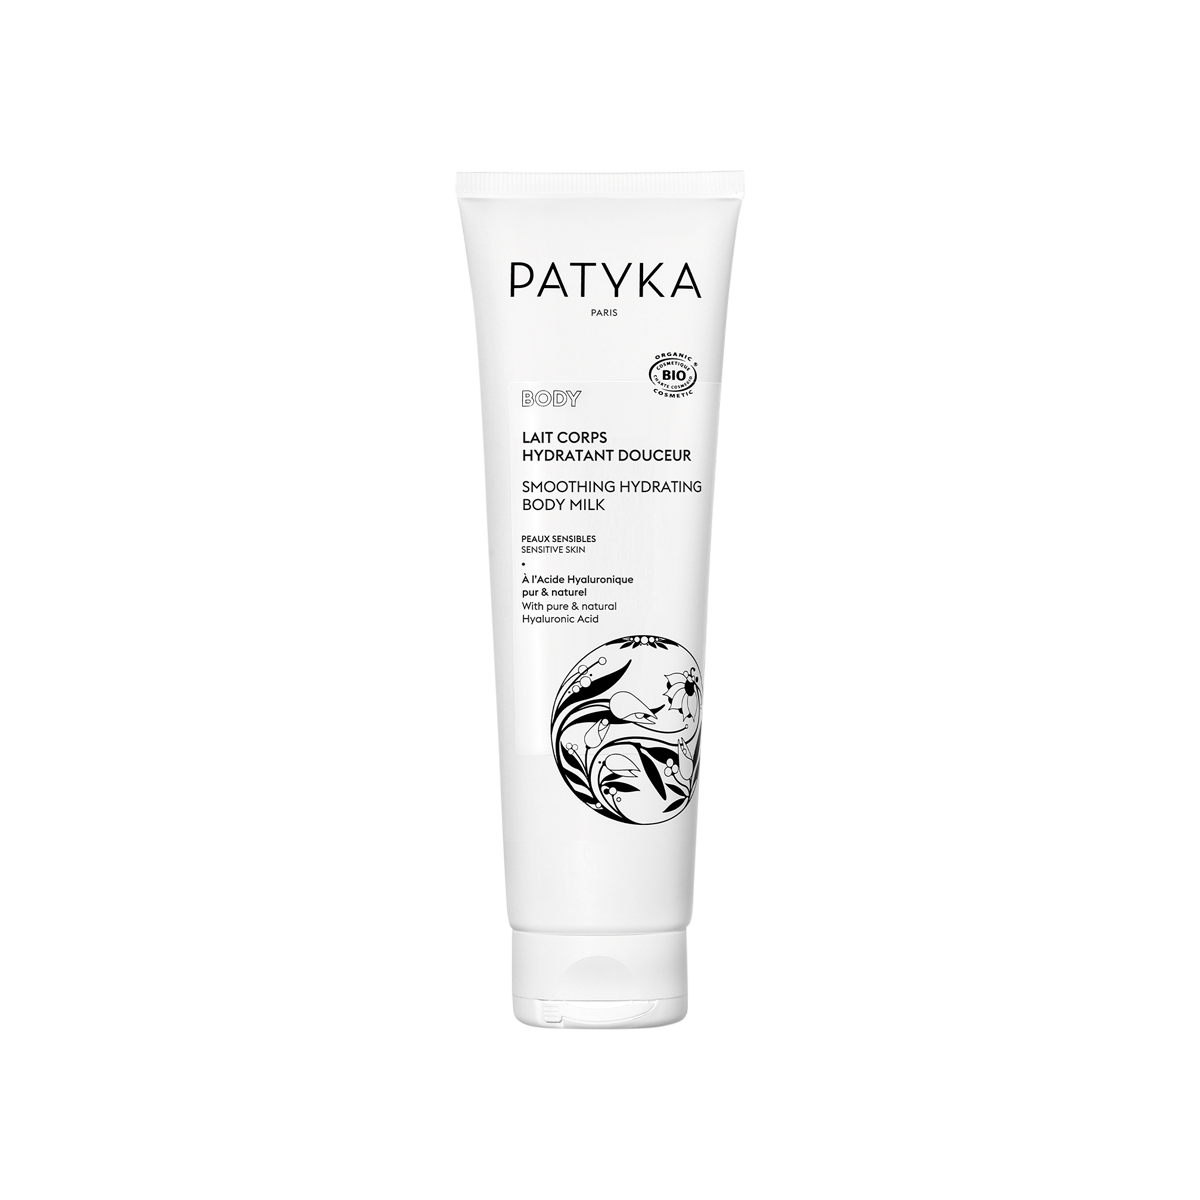 Patyka - Smoothing Hydrating Body Lotion